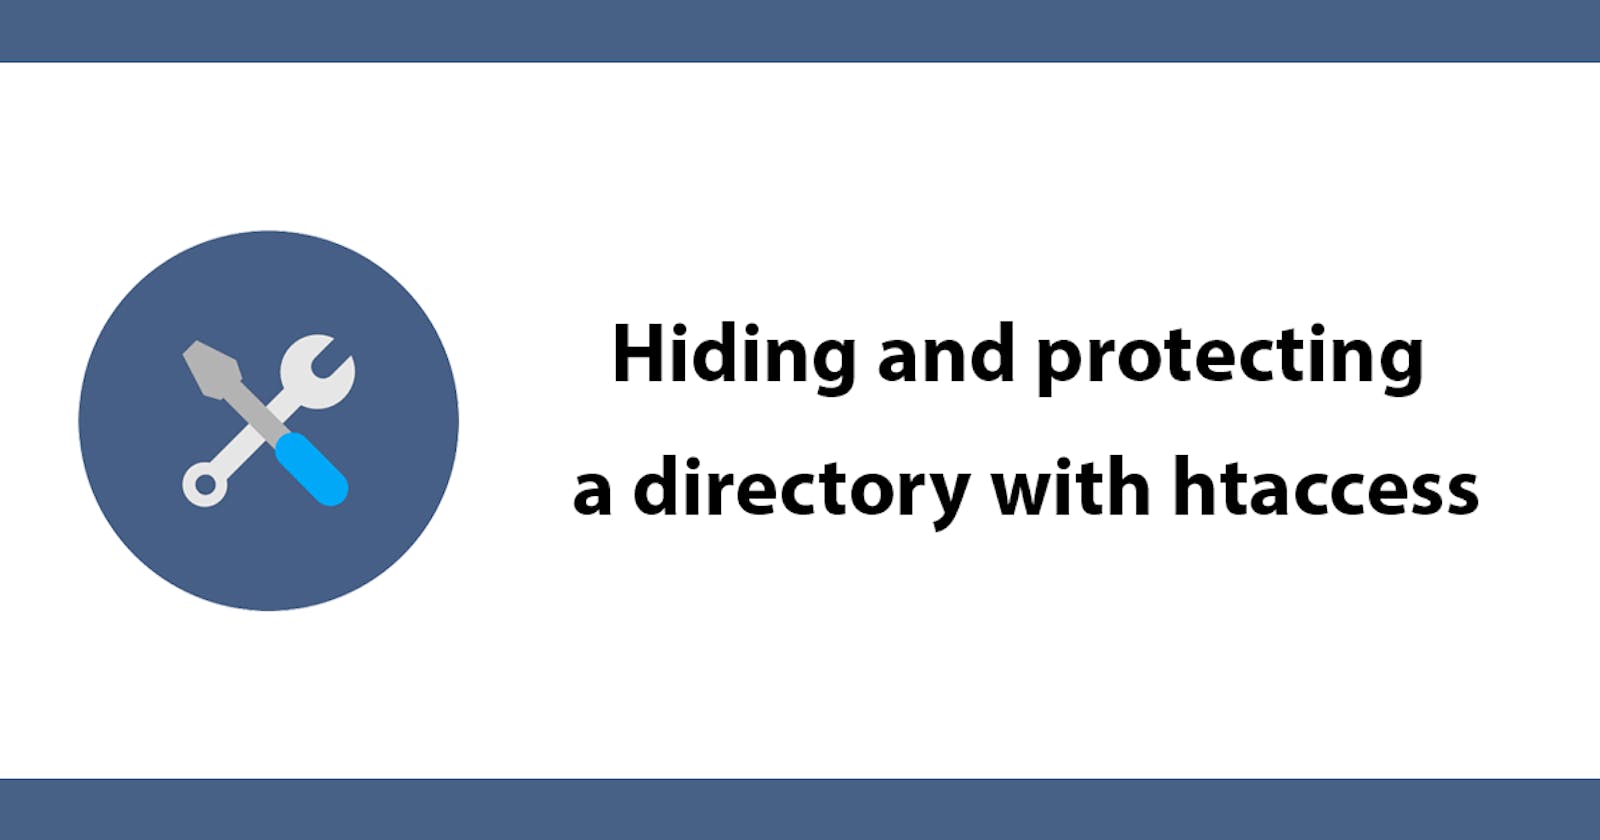 Hiding and protecting a directory with htaccess